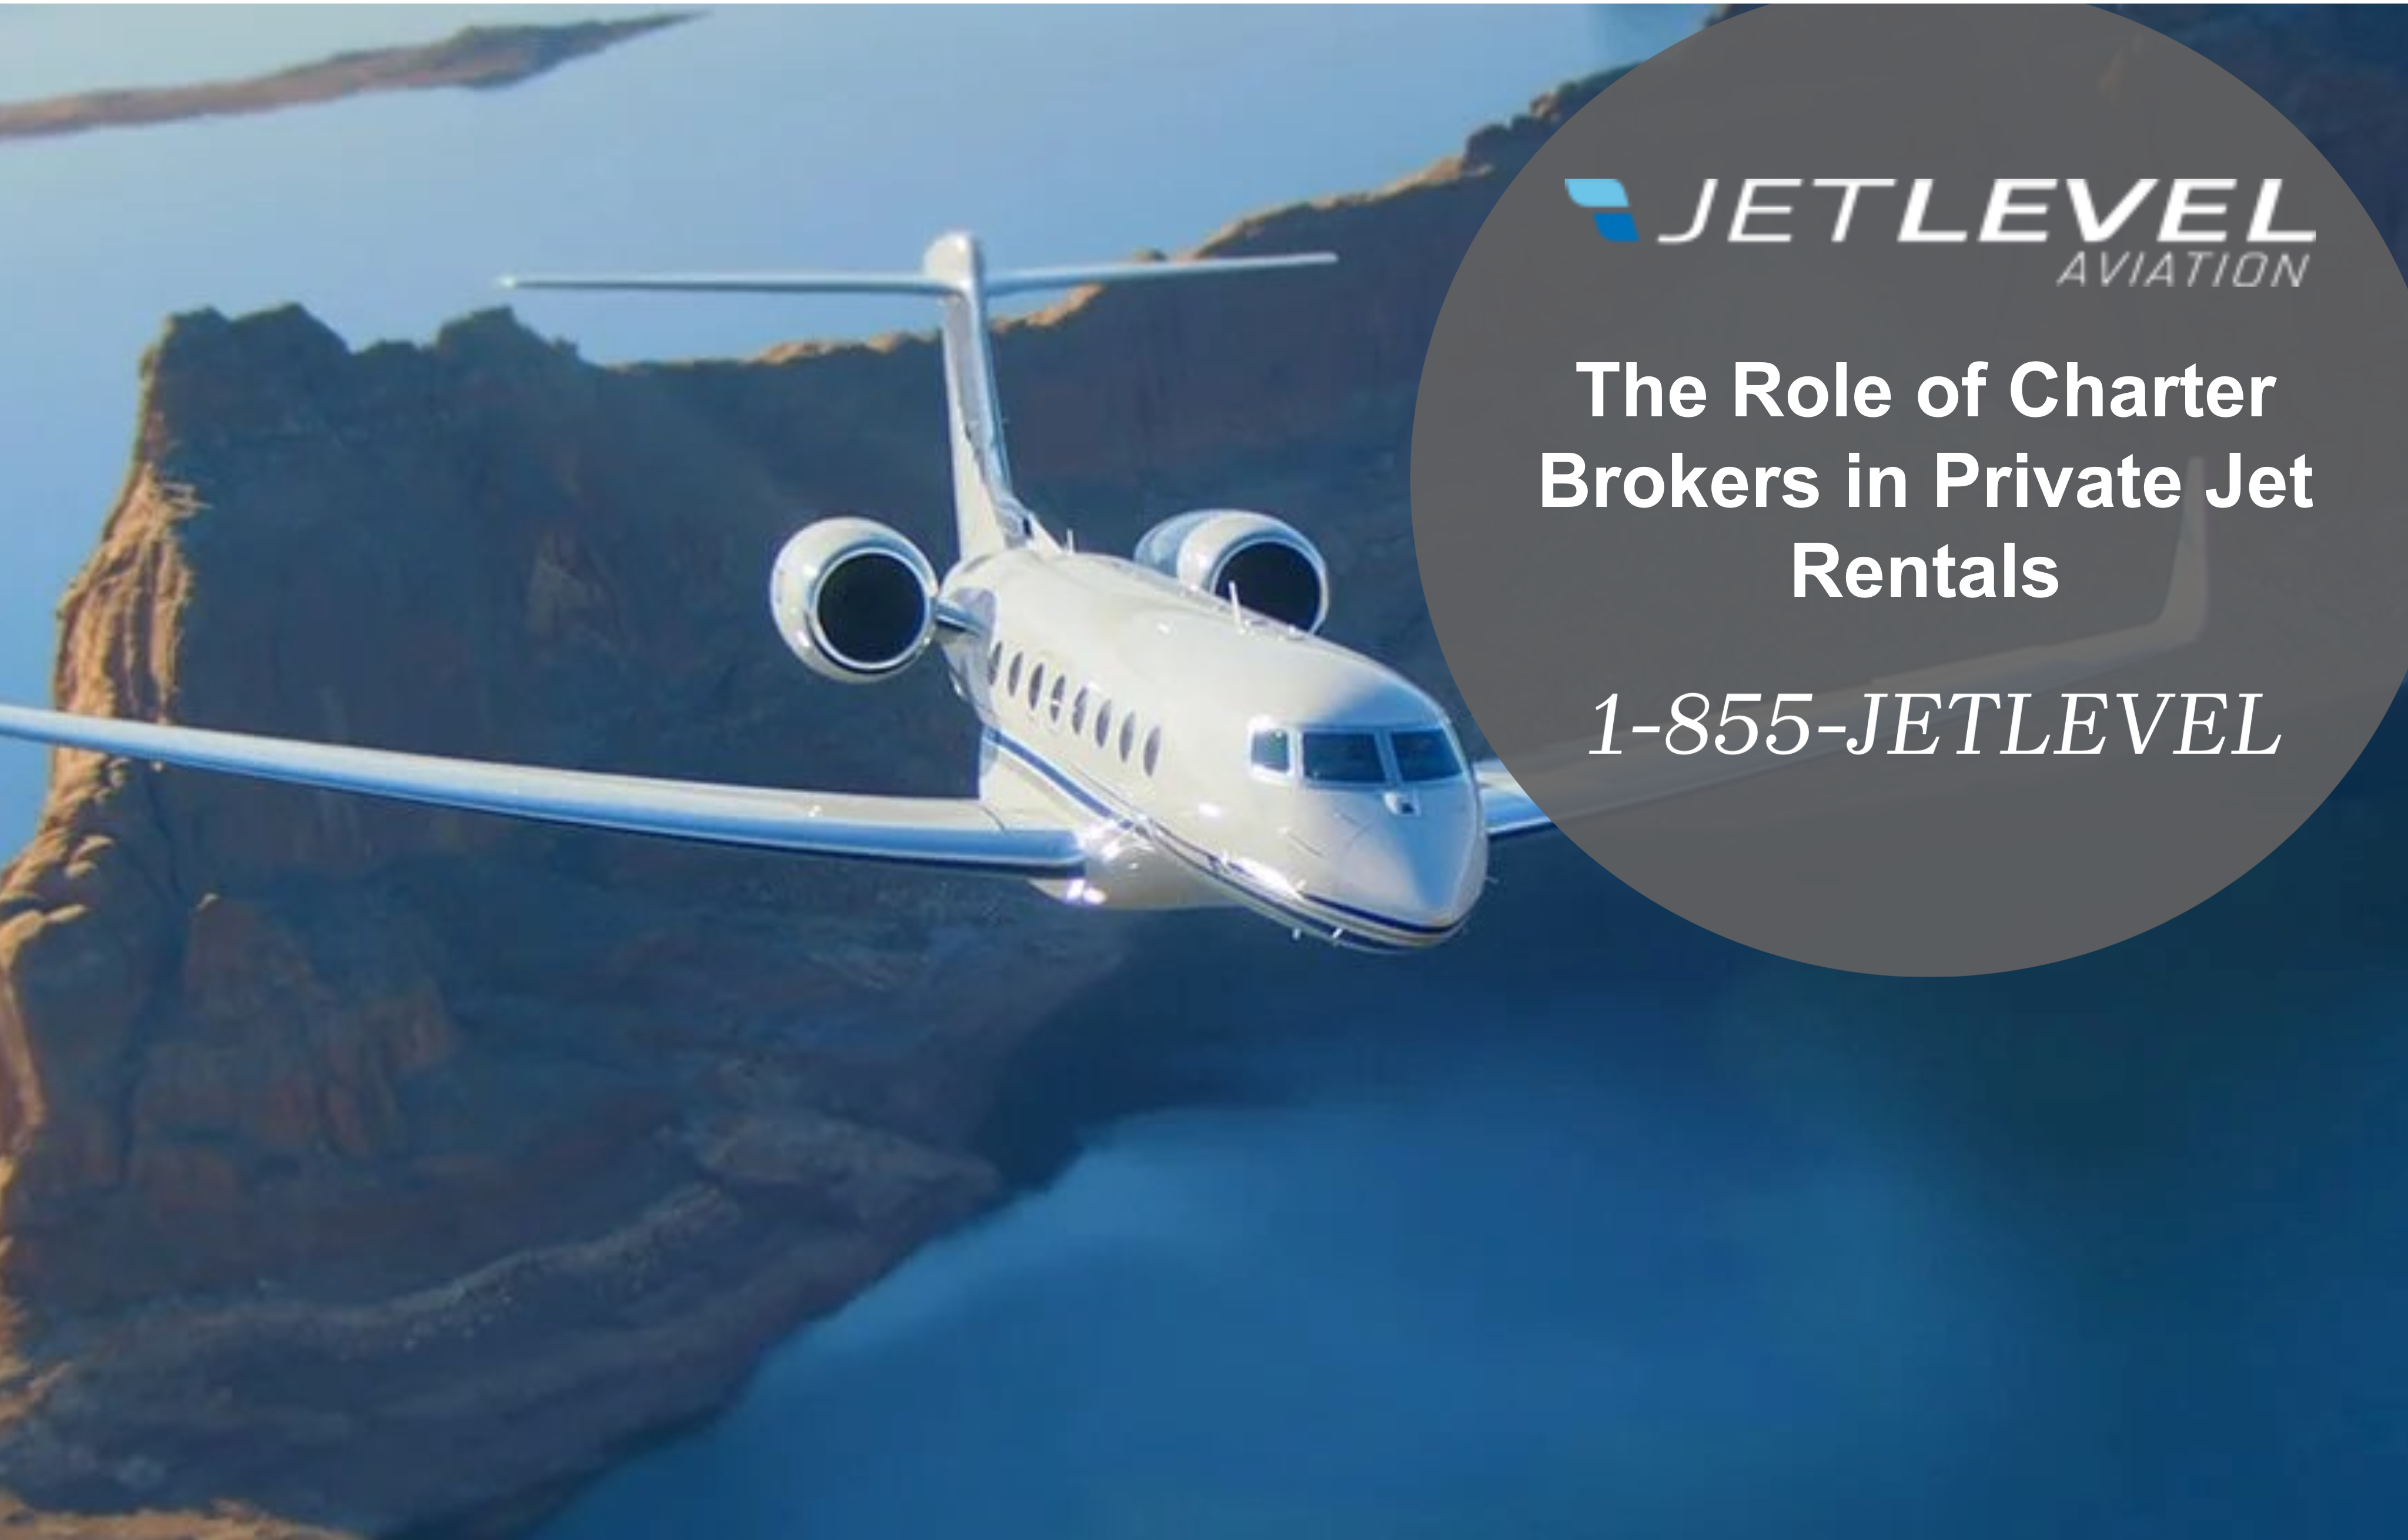 The Role of Charter Brokers in Private Jet Rentals